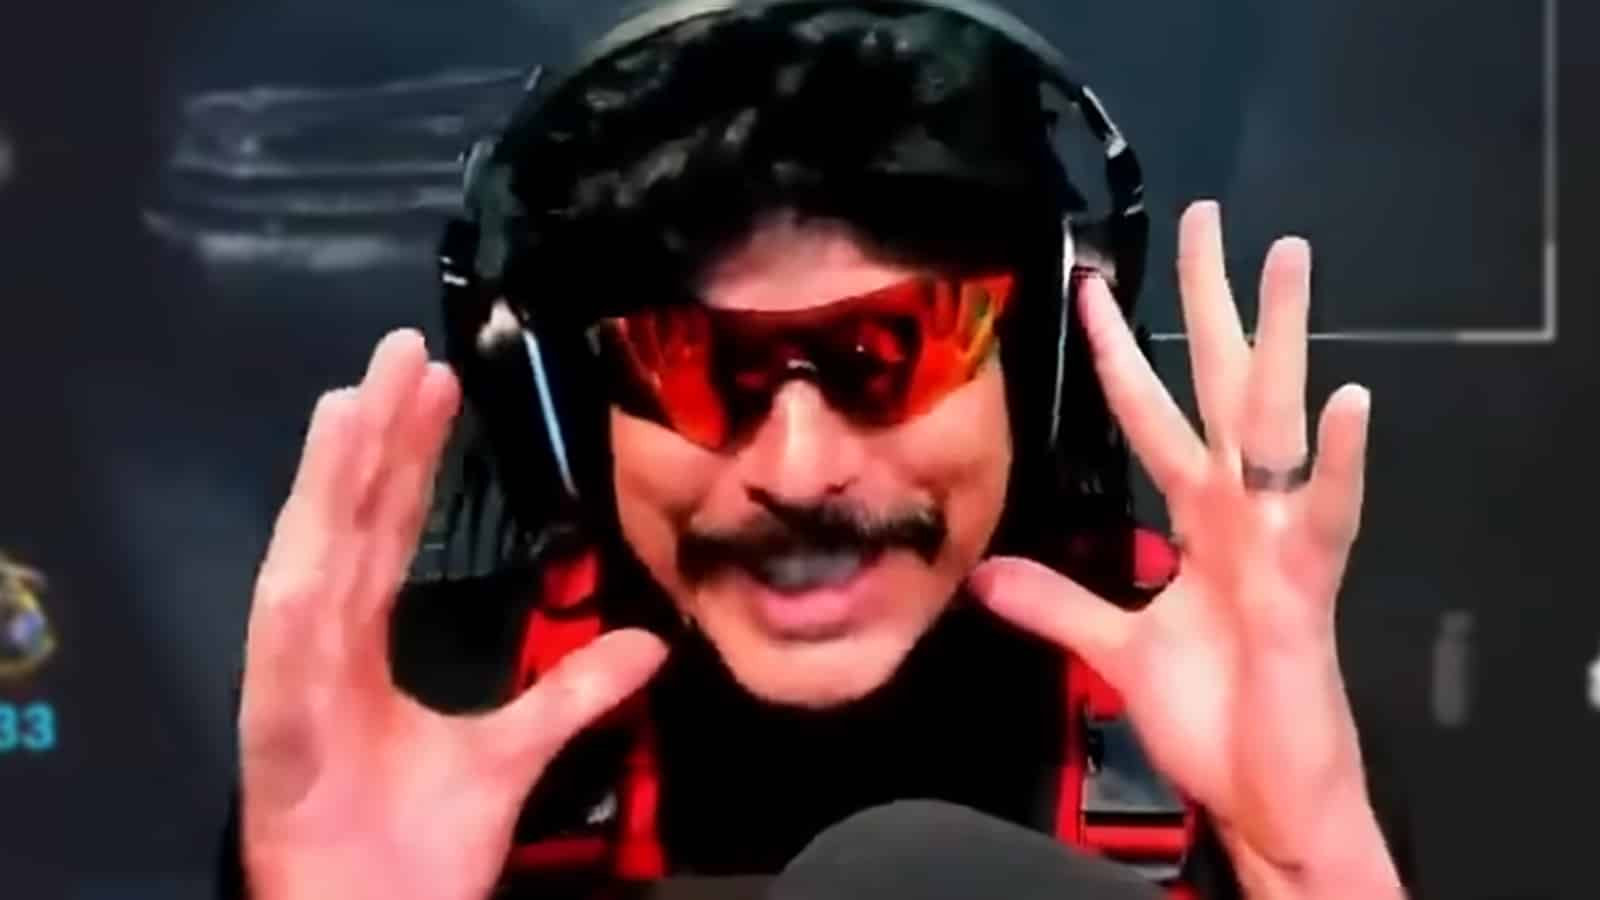 Dr Disrespect yells into his YouTube camera on-stream.